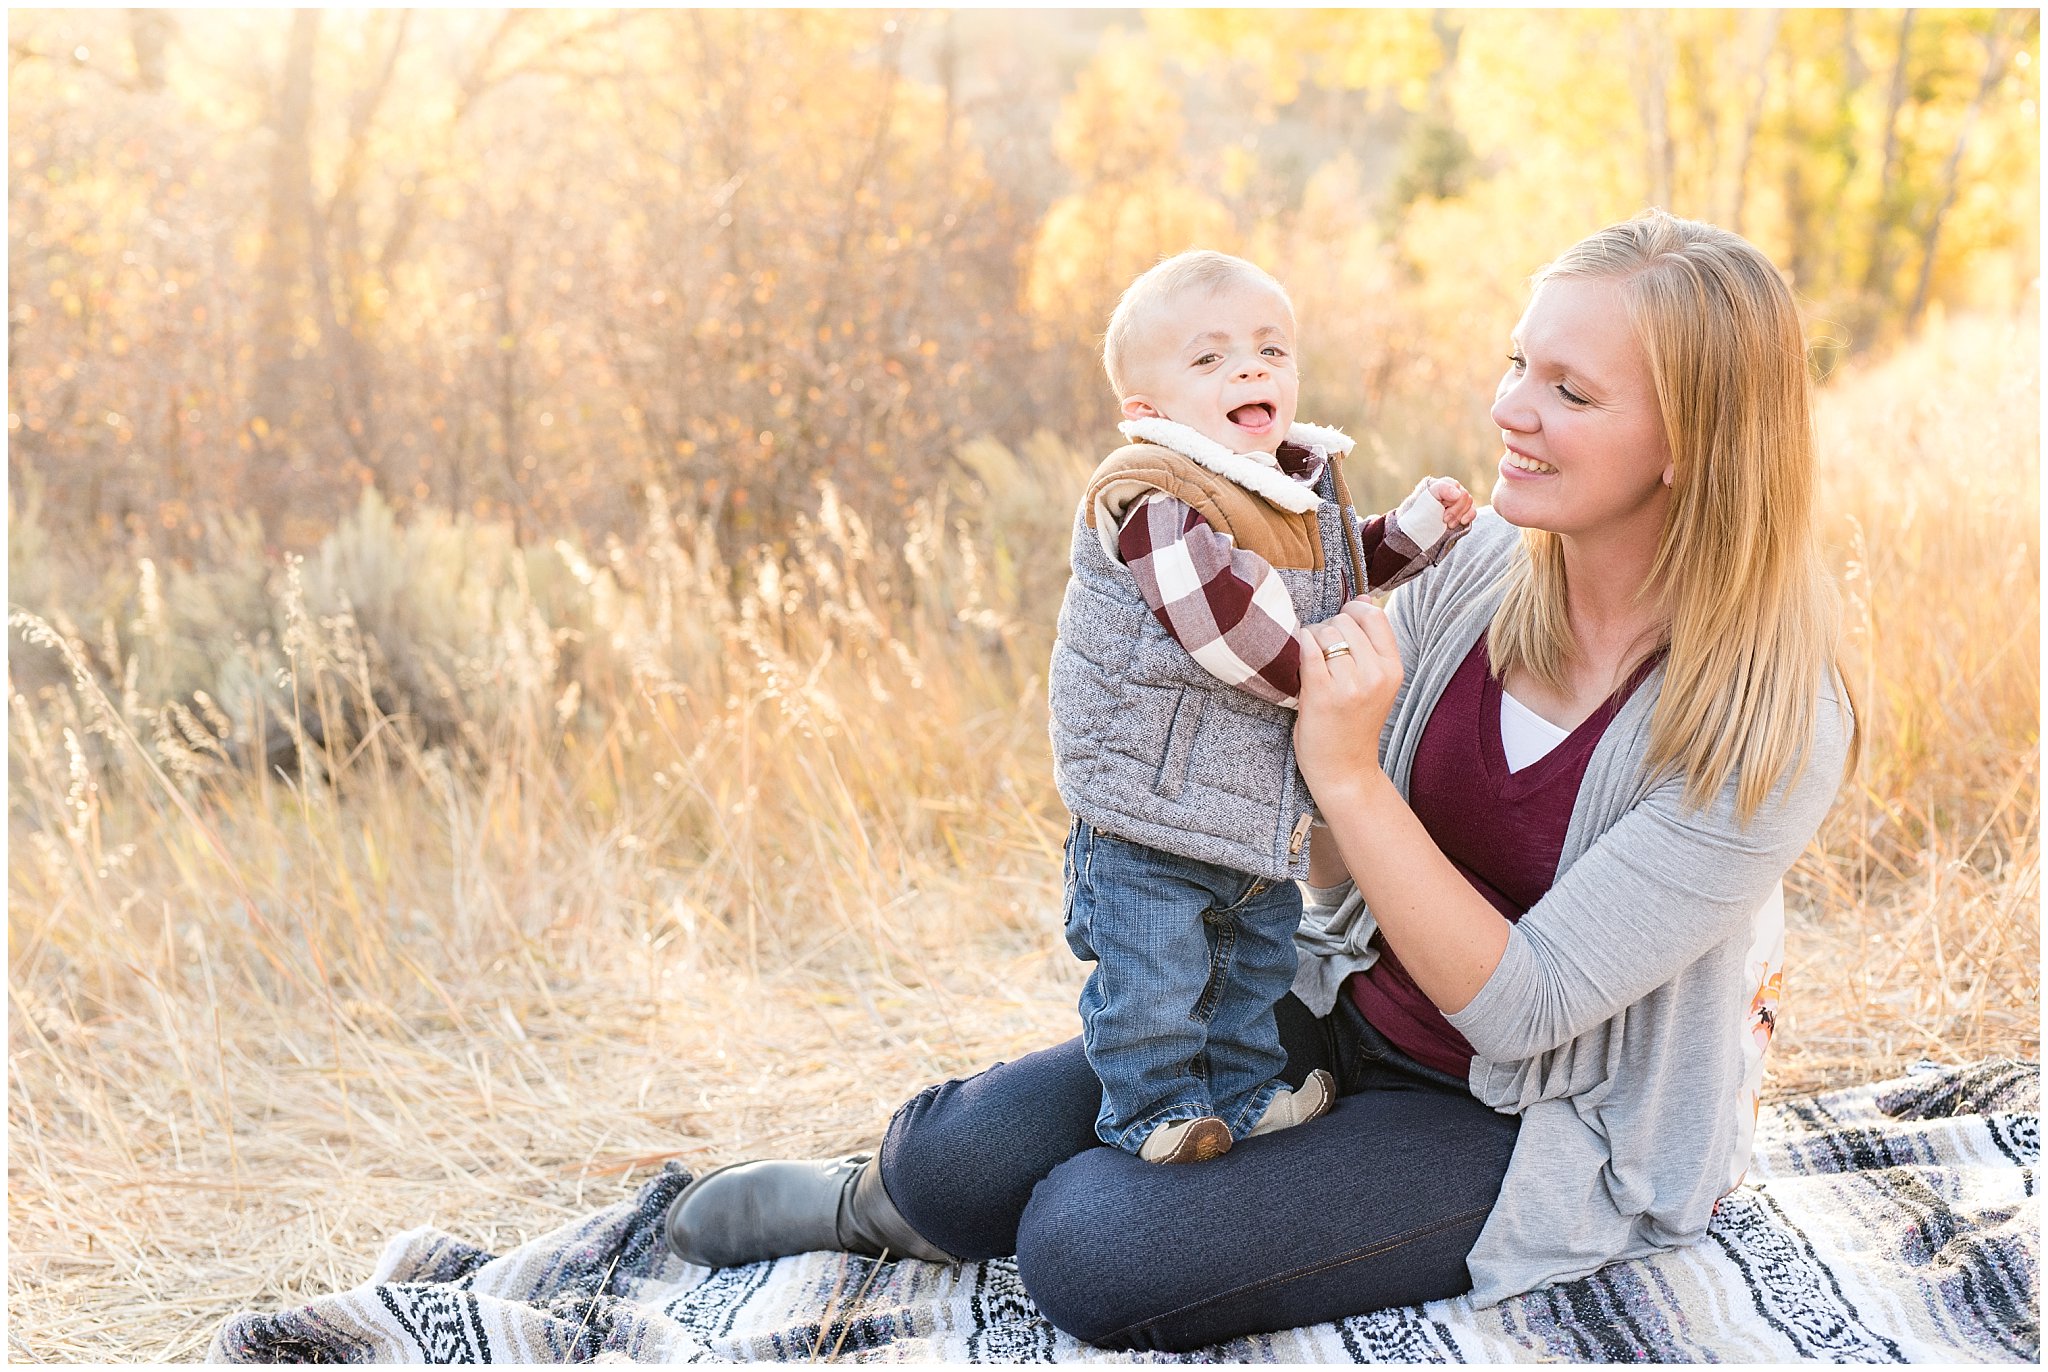 Mom and laughing infant portrait | Fall family photo session at Snowbasin | Snowbasin Resort | Jessie and Dallin Photography